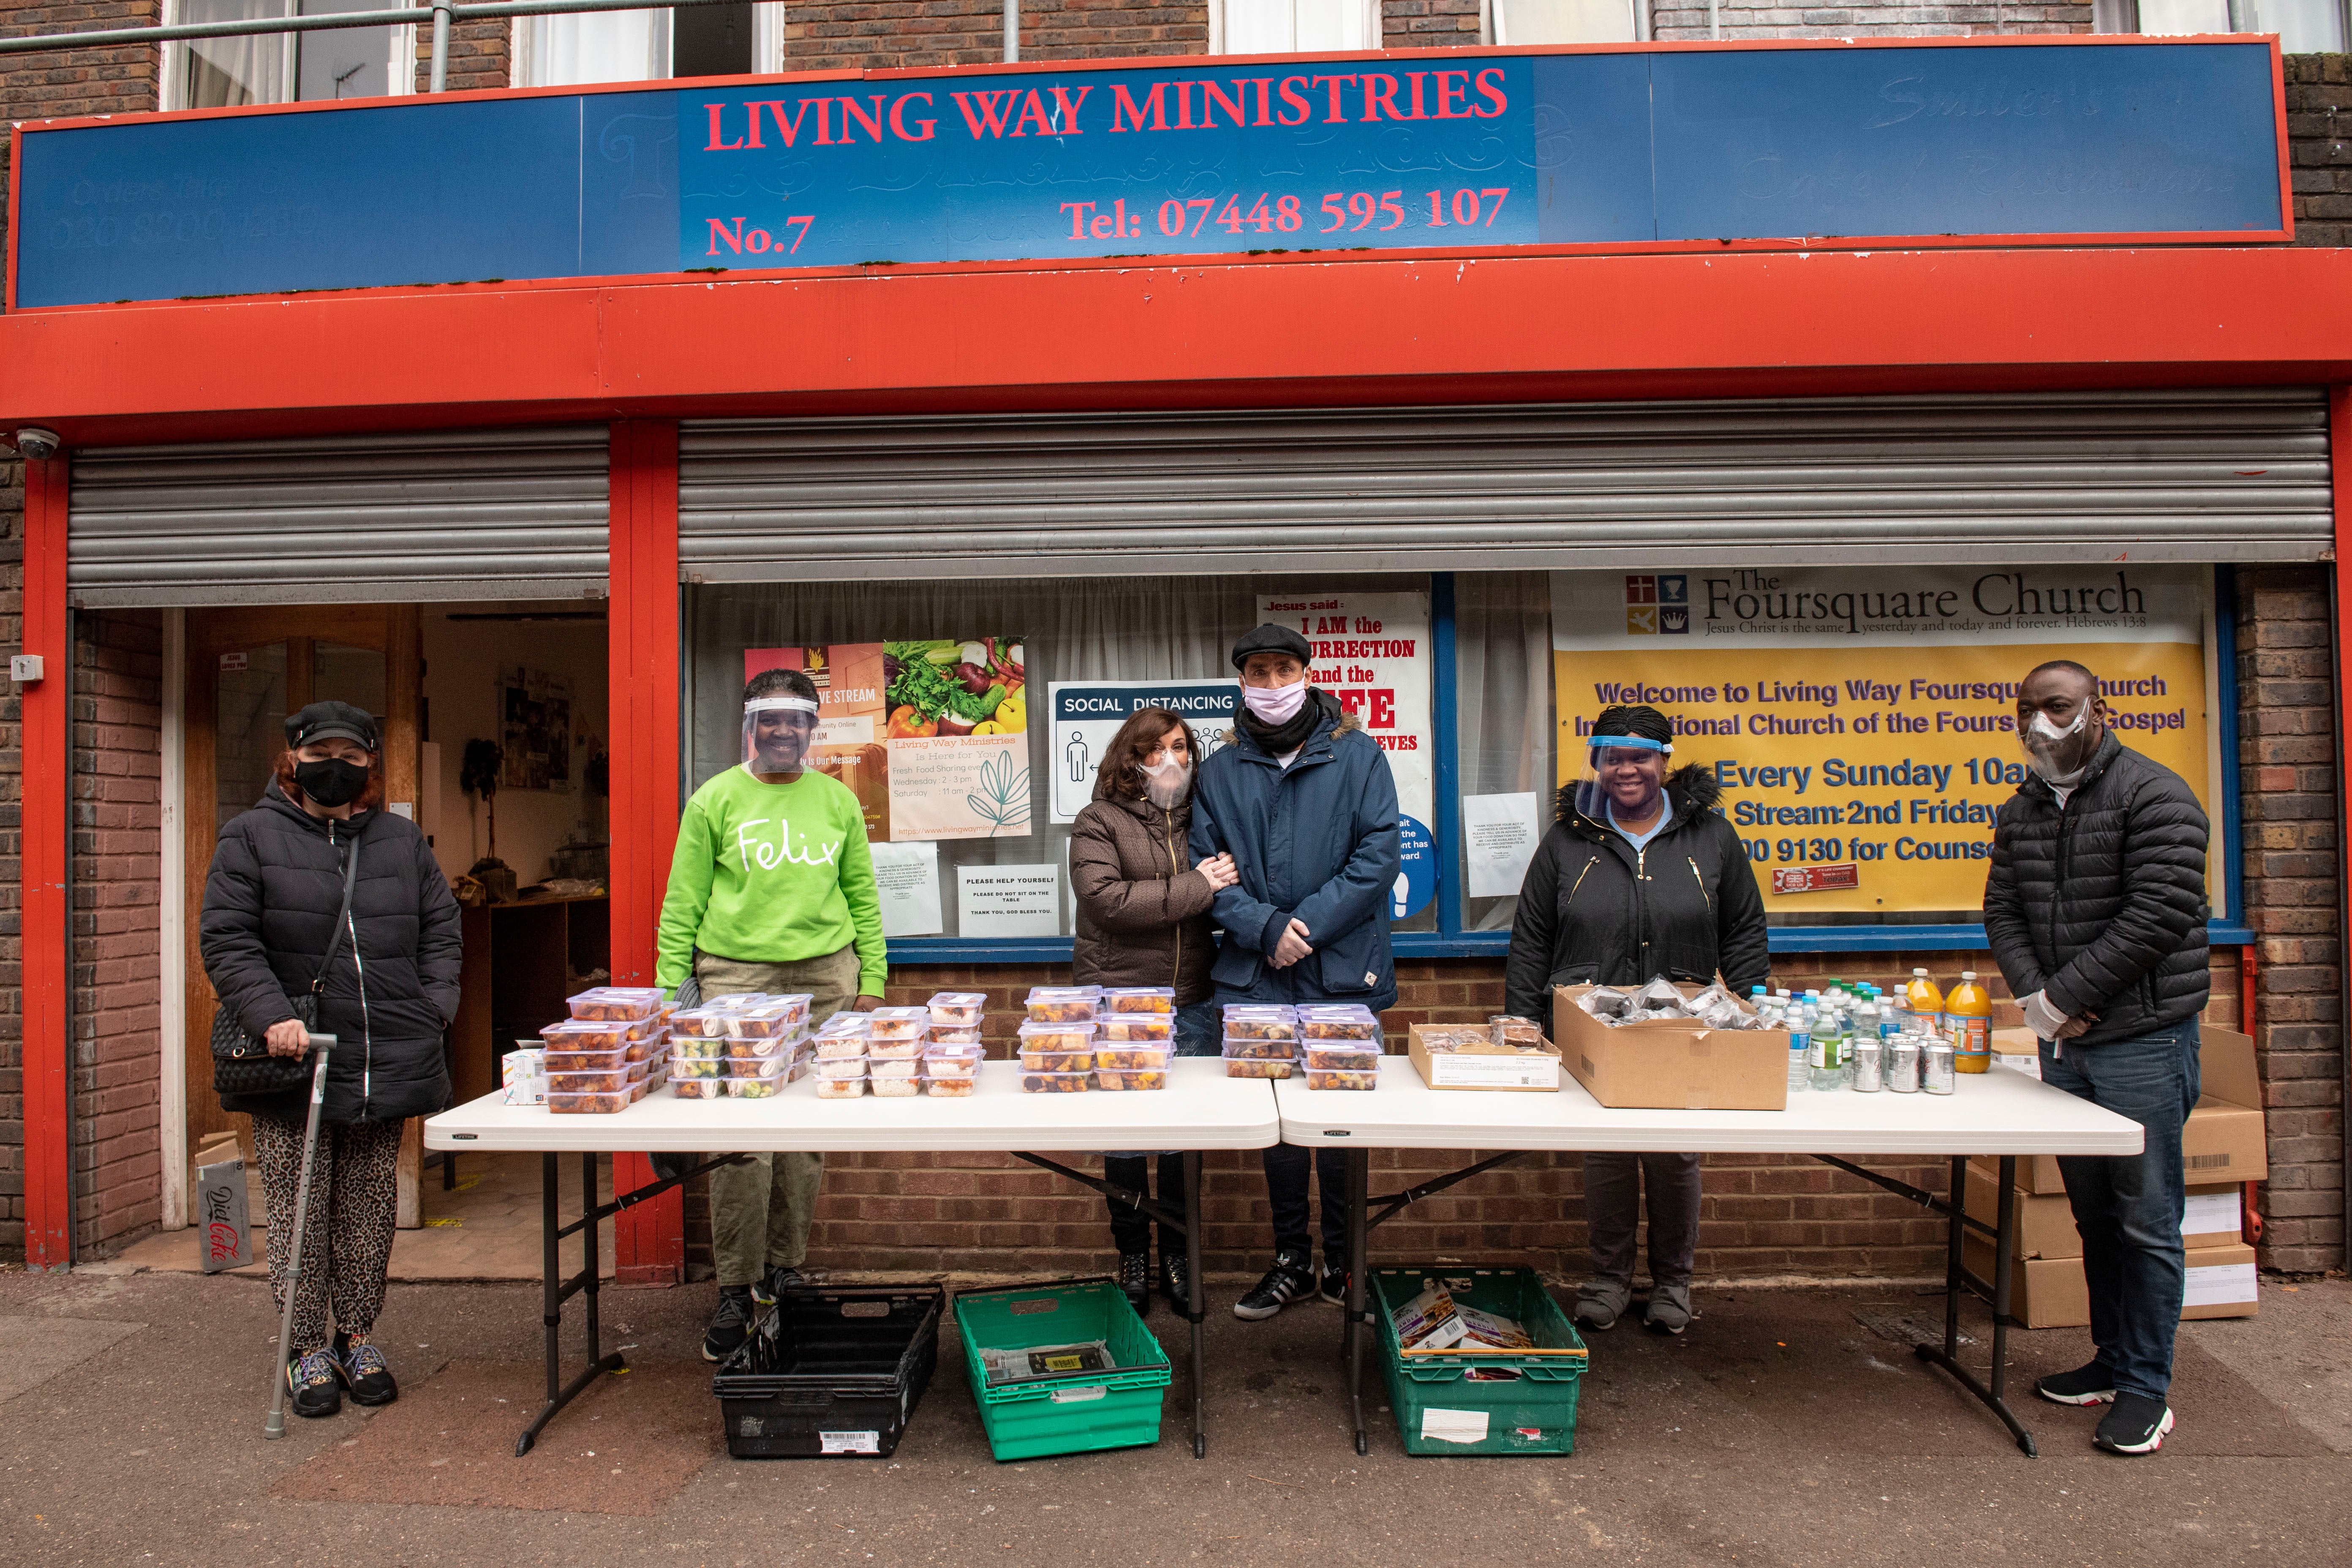 Shirley and Danny help out at the Living Way Ministries community centre in Colindale, northwest London